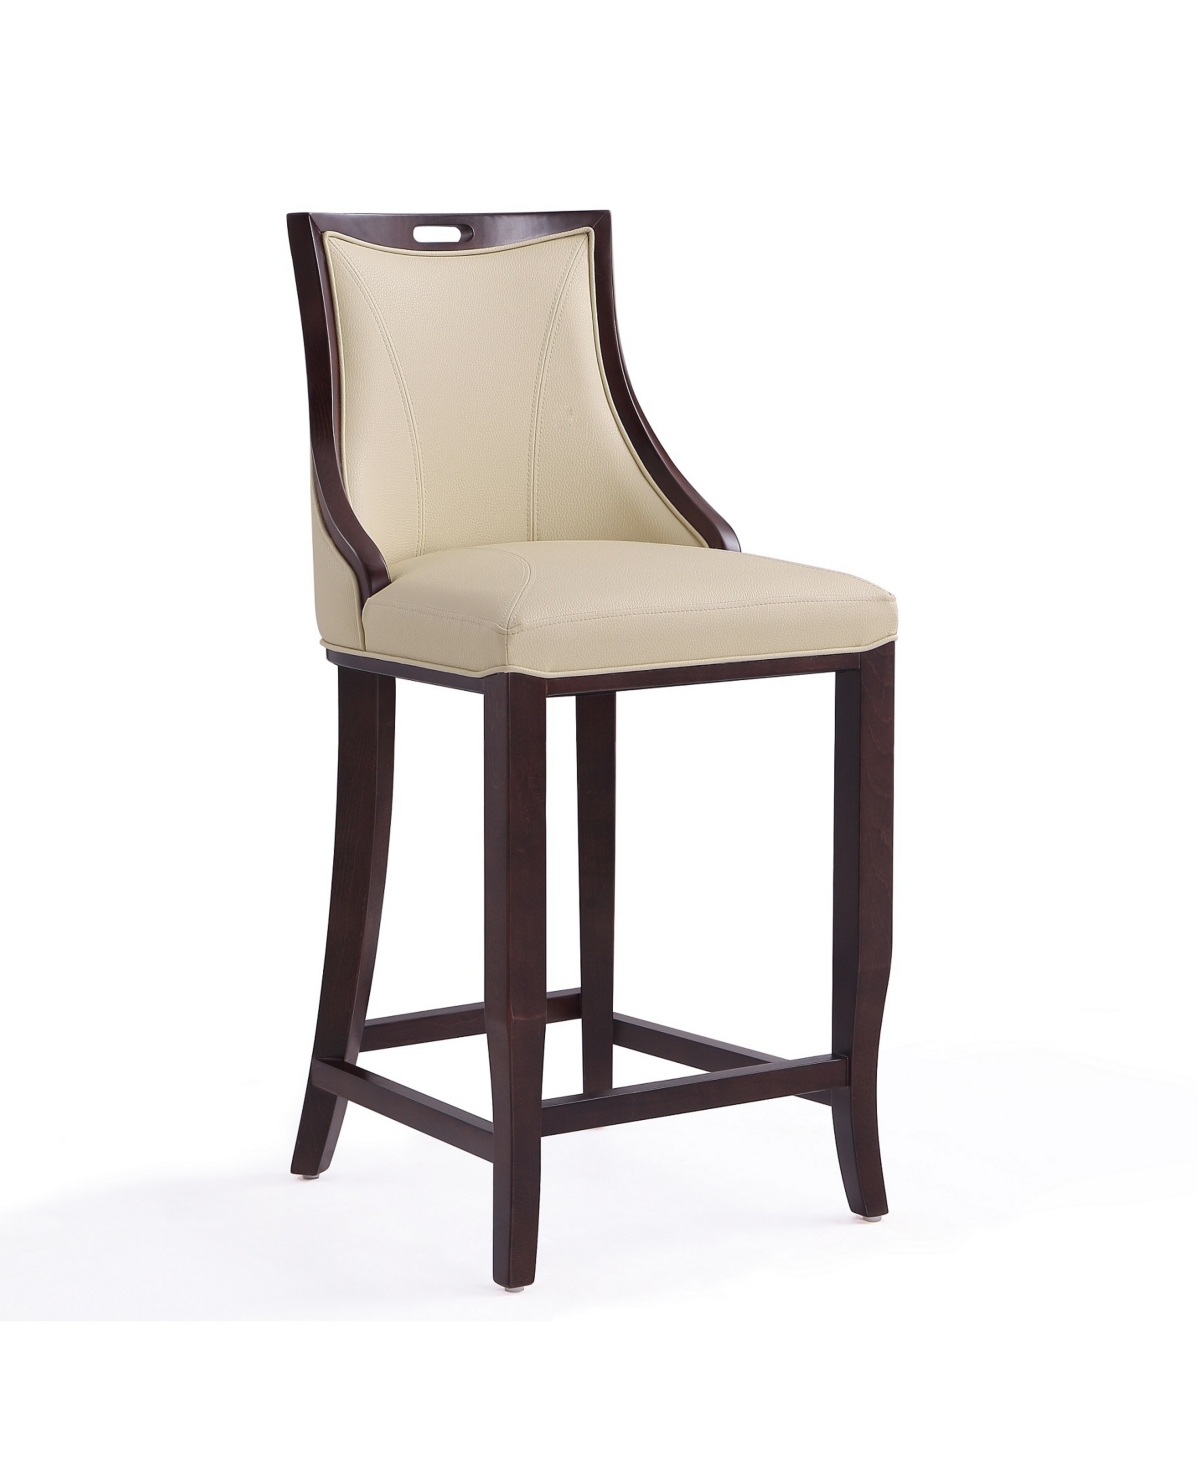 MANHATTAN COMFORT EMPEROR 19" L BEECH WOOD FAUX LEATHER UPHOLSTERED BARSTOOL